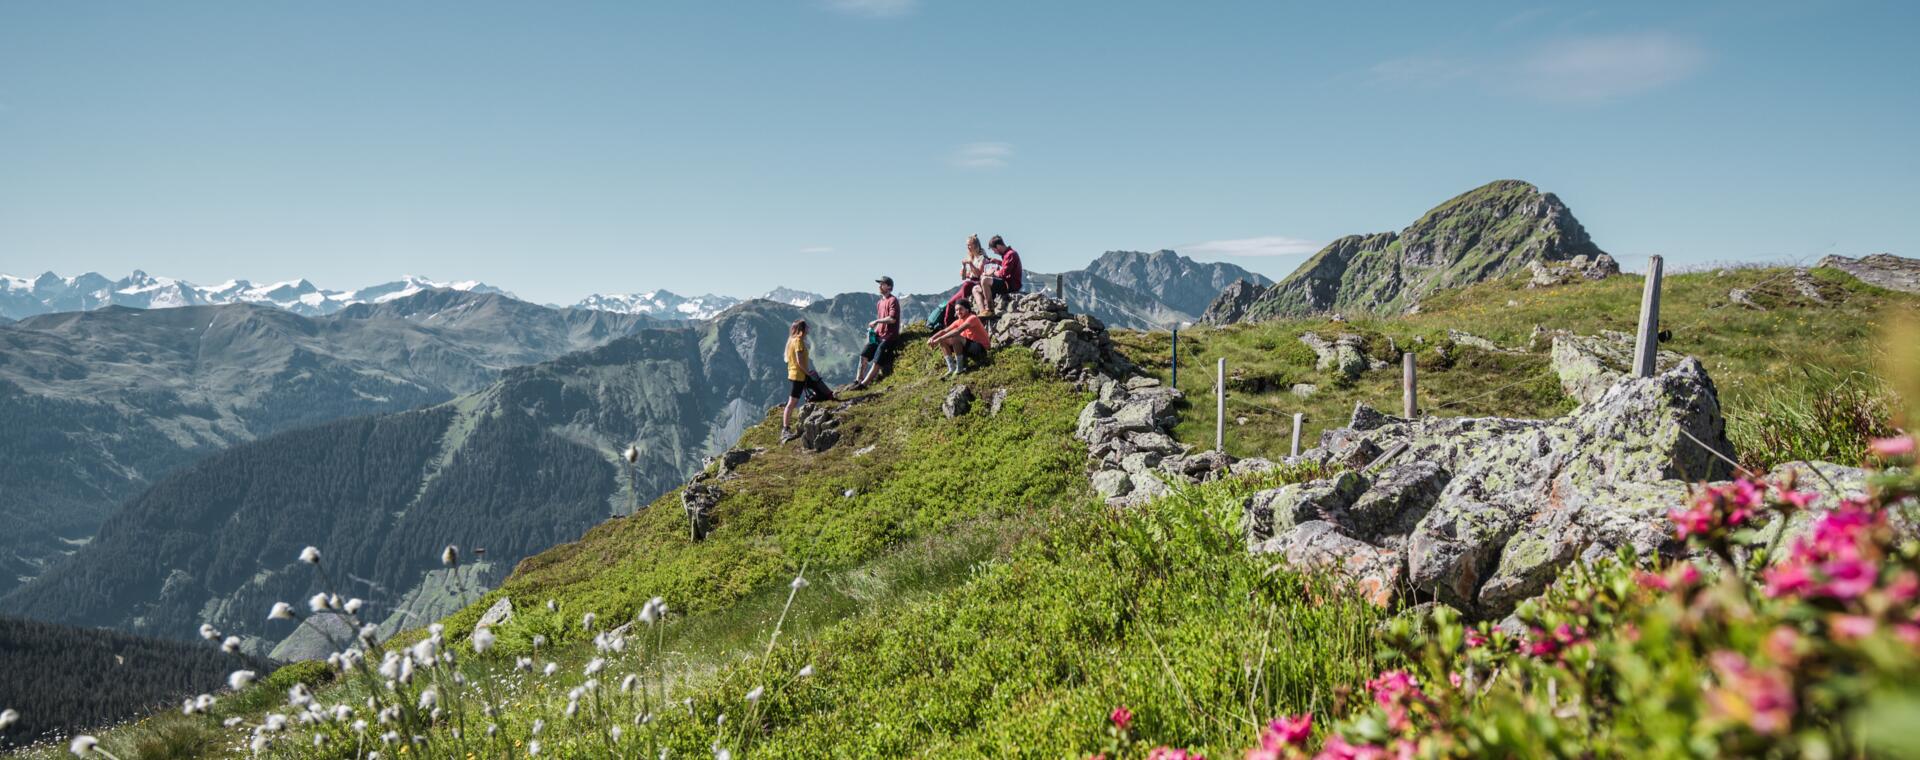 hiking in a group in Saalbach | © Mia Knoll